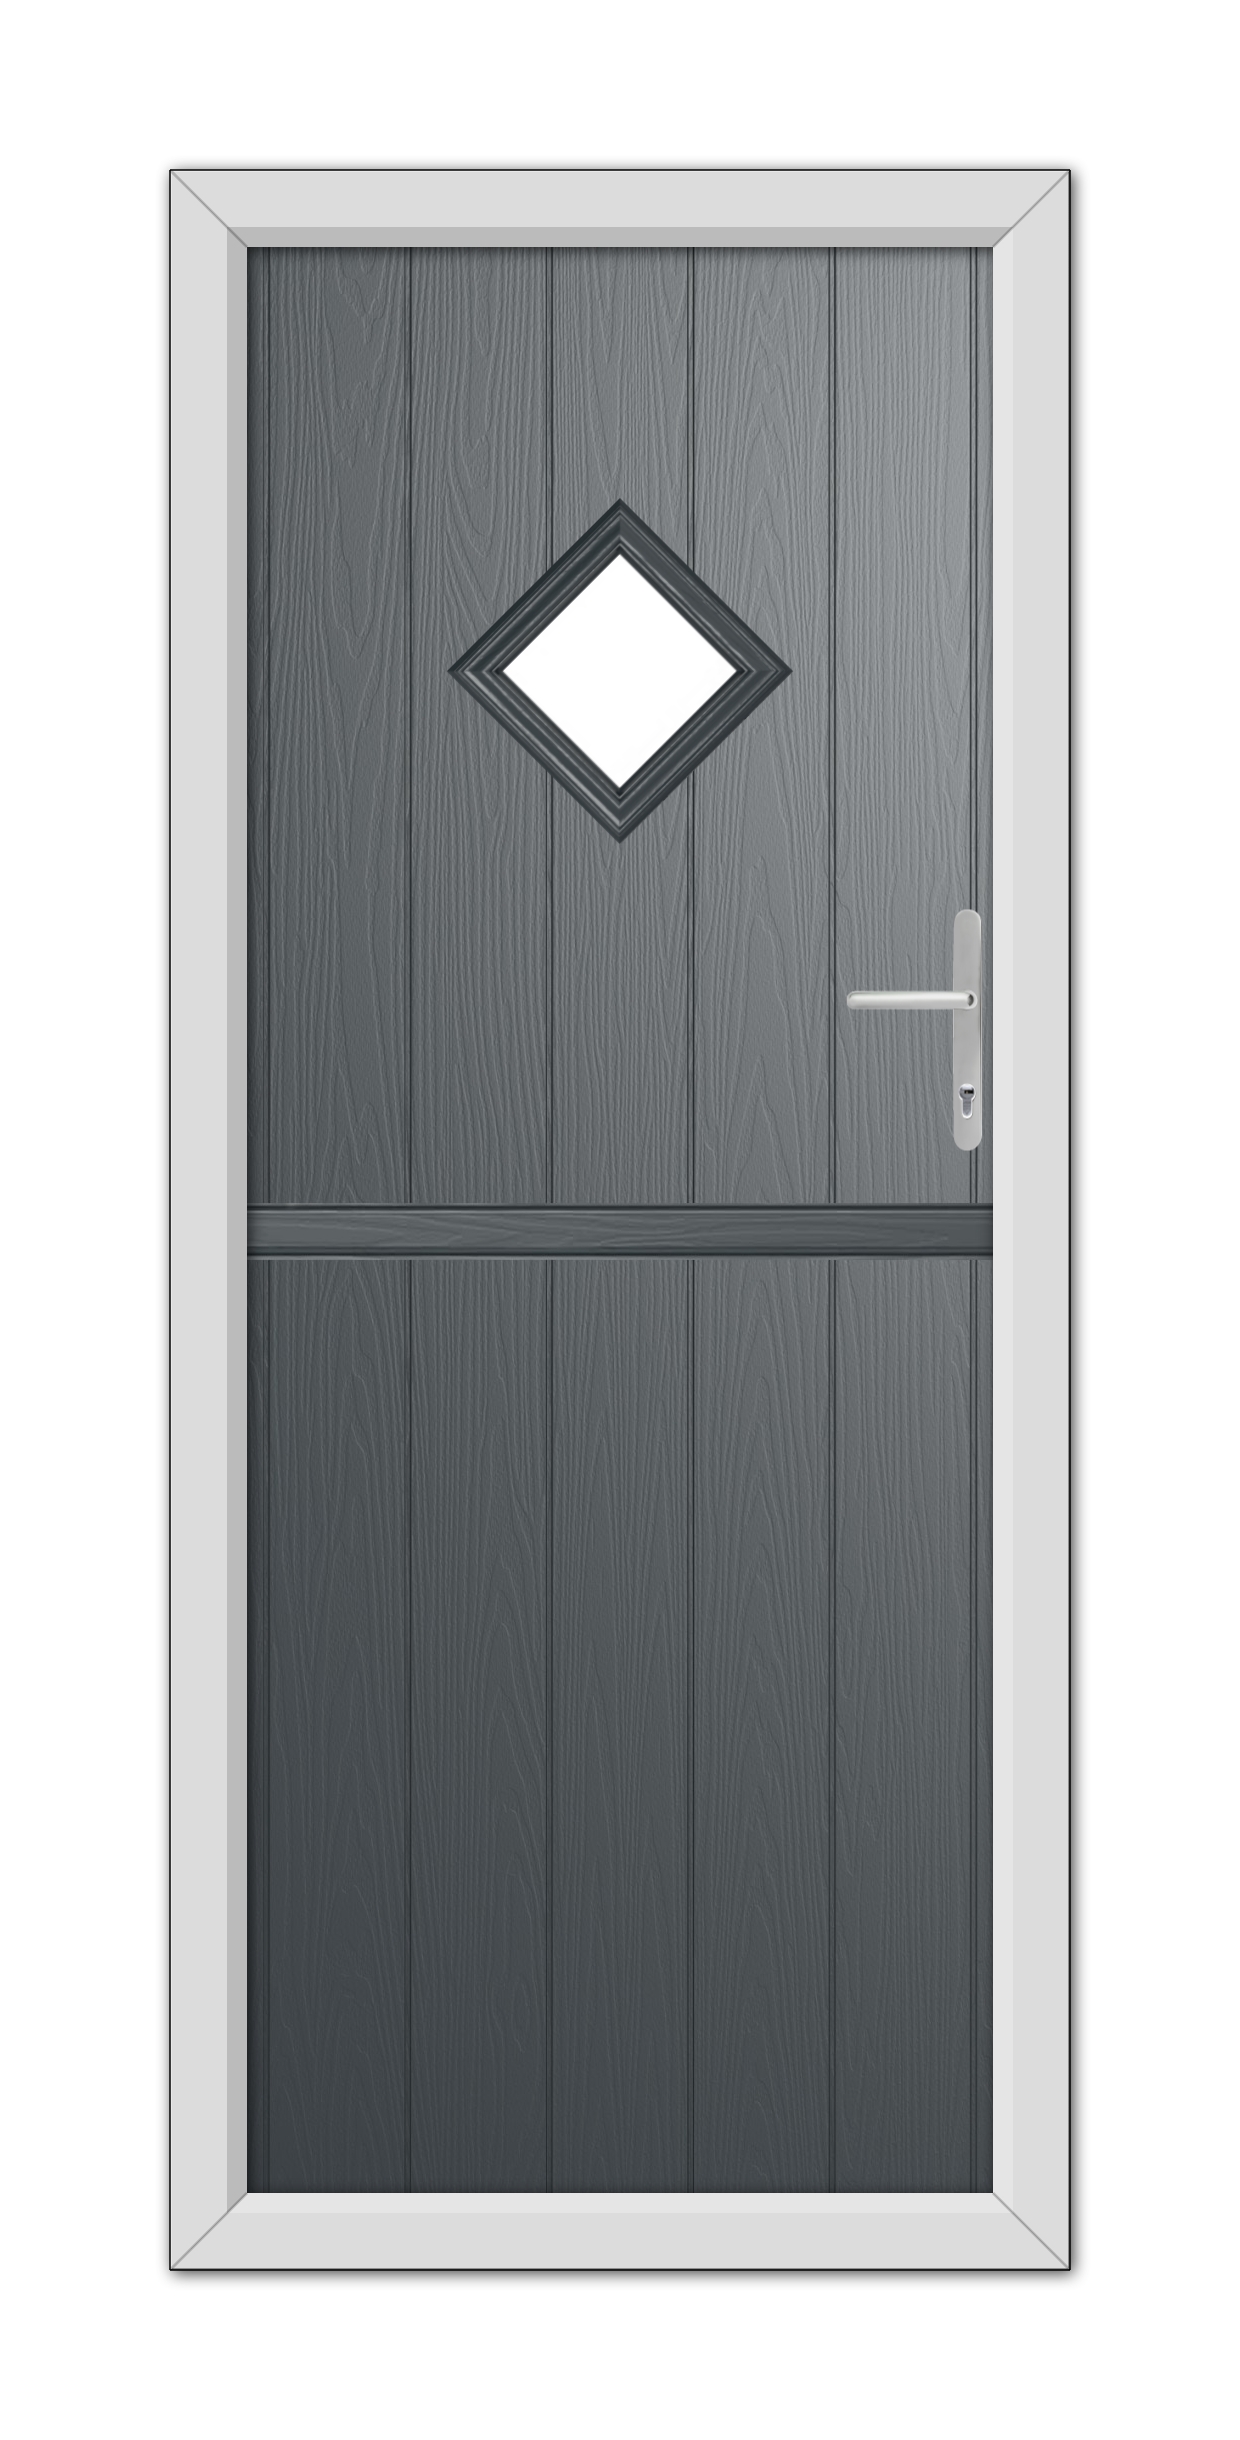 A modern Anthracite Grey Cornwall Stable Composite Door 48mm Timber Core with a diamond-shaped window, framed in white, and equipped with a metal handle on the right side.